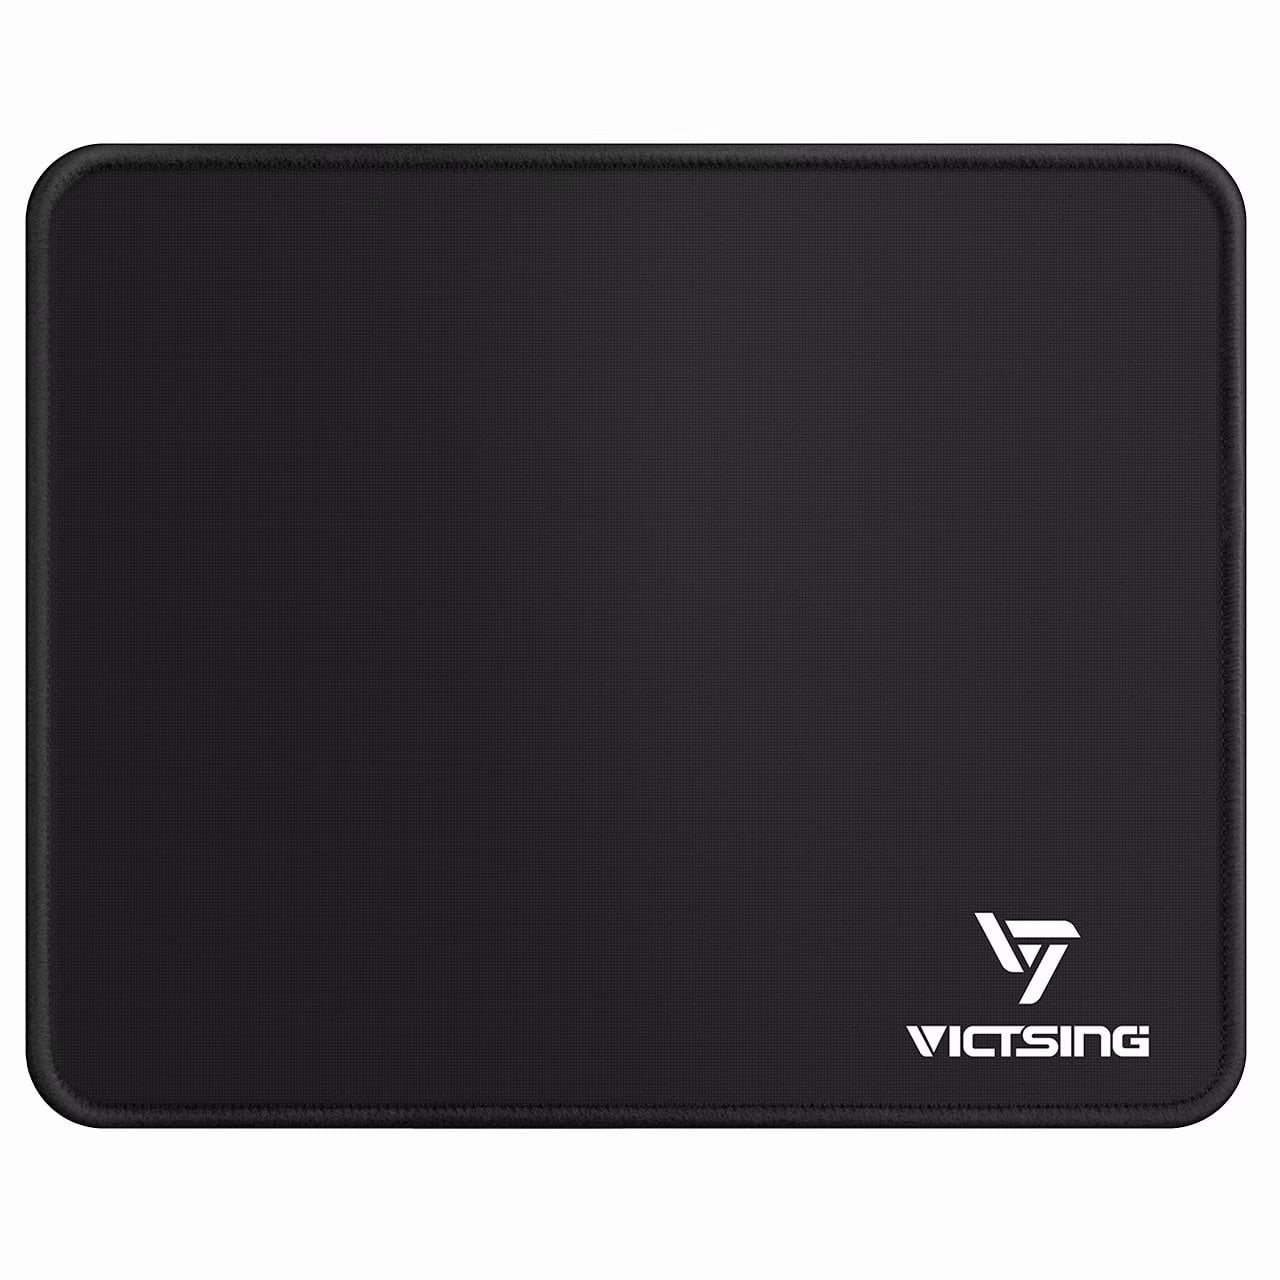 VicTsing Gaming Mouse Mat Pad, 260&times;210&times;2mm Dimension Stitched Edges Mouse Pad with Premium-Textured Surface, Non-slip Rubber Base, Laser &amp; Optical Mouse Compatible Black